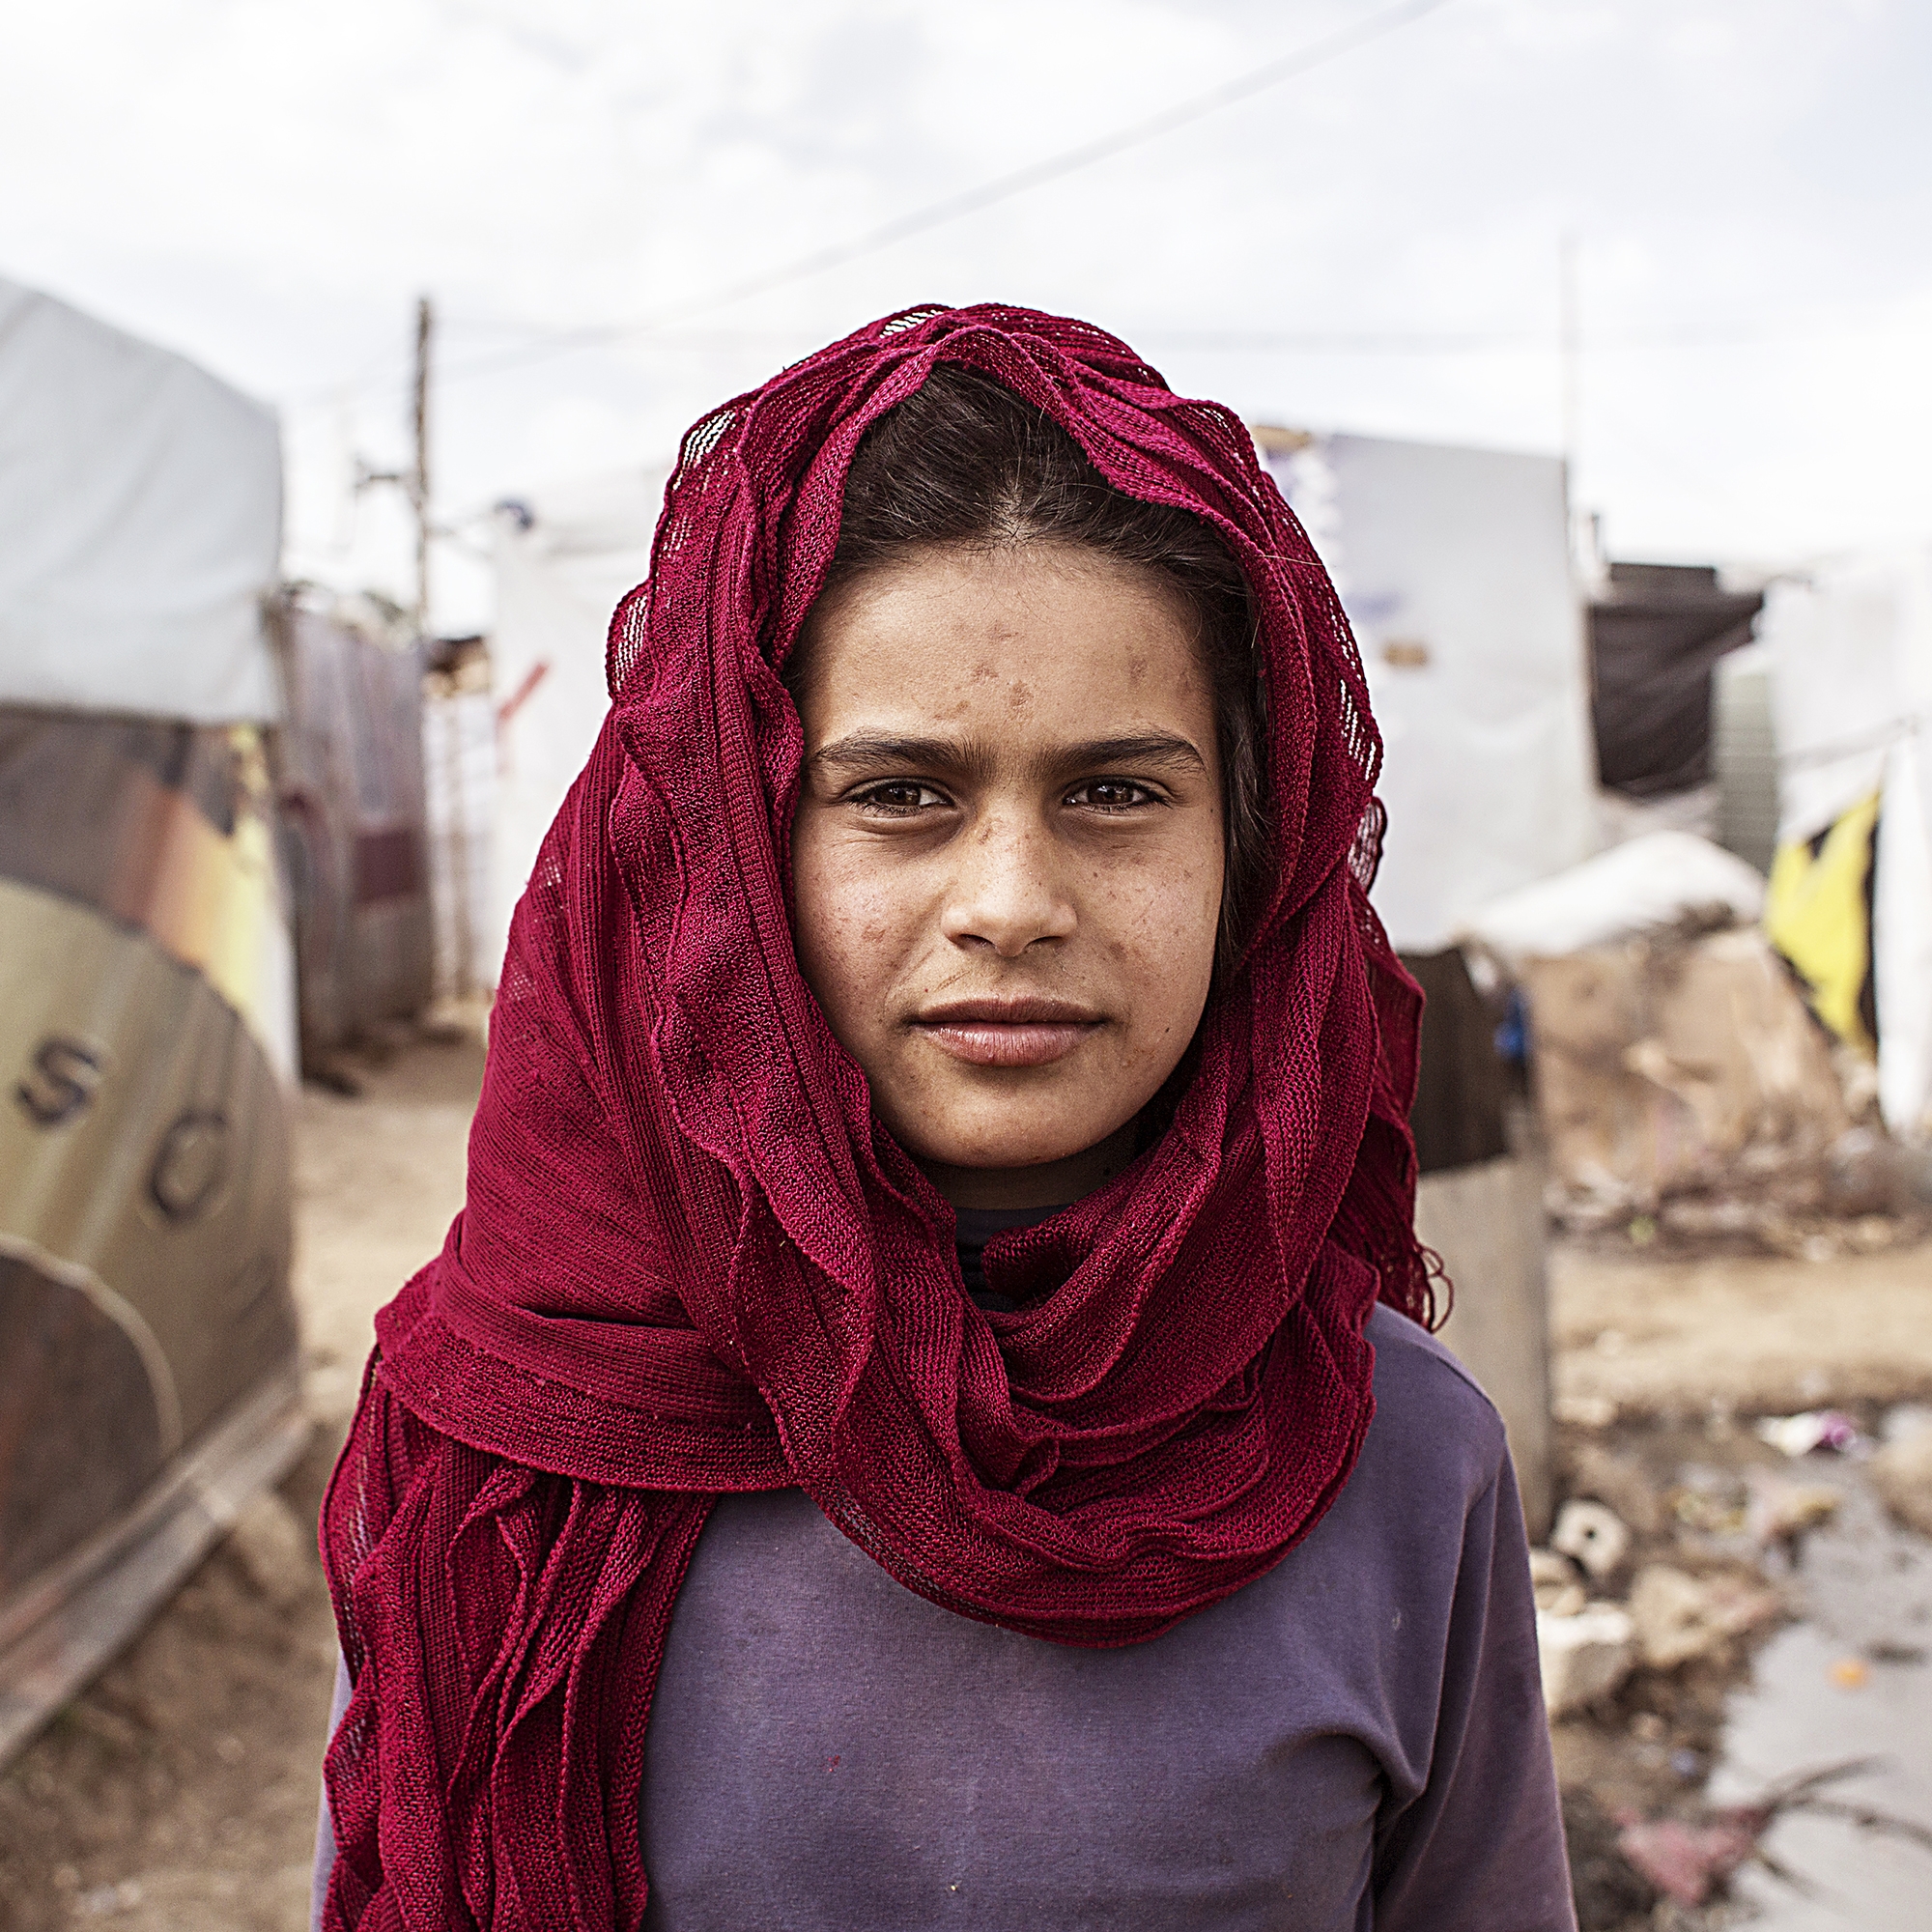 A 12-year-old Syrian girl, in the Anjar Refugee camp in Lebanon. Save the Children offers programs in the camp to help keep refugee children healthy, educated and safe.  